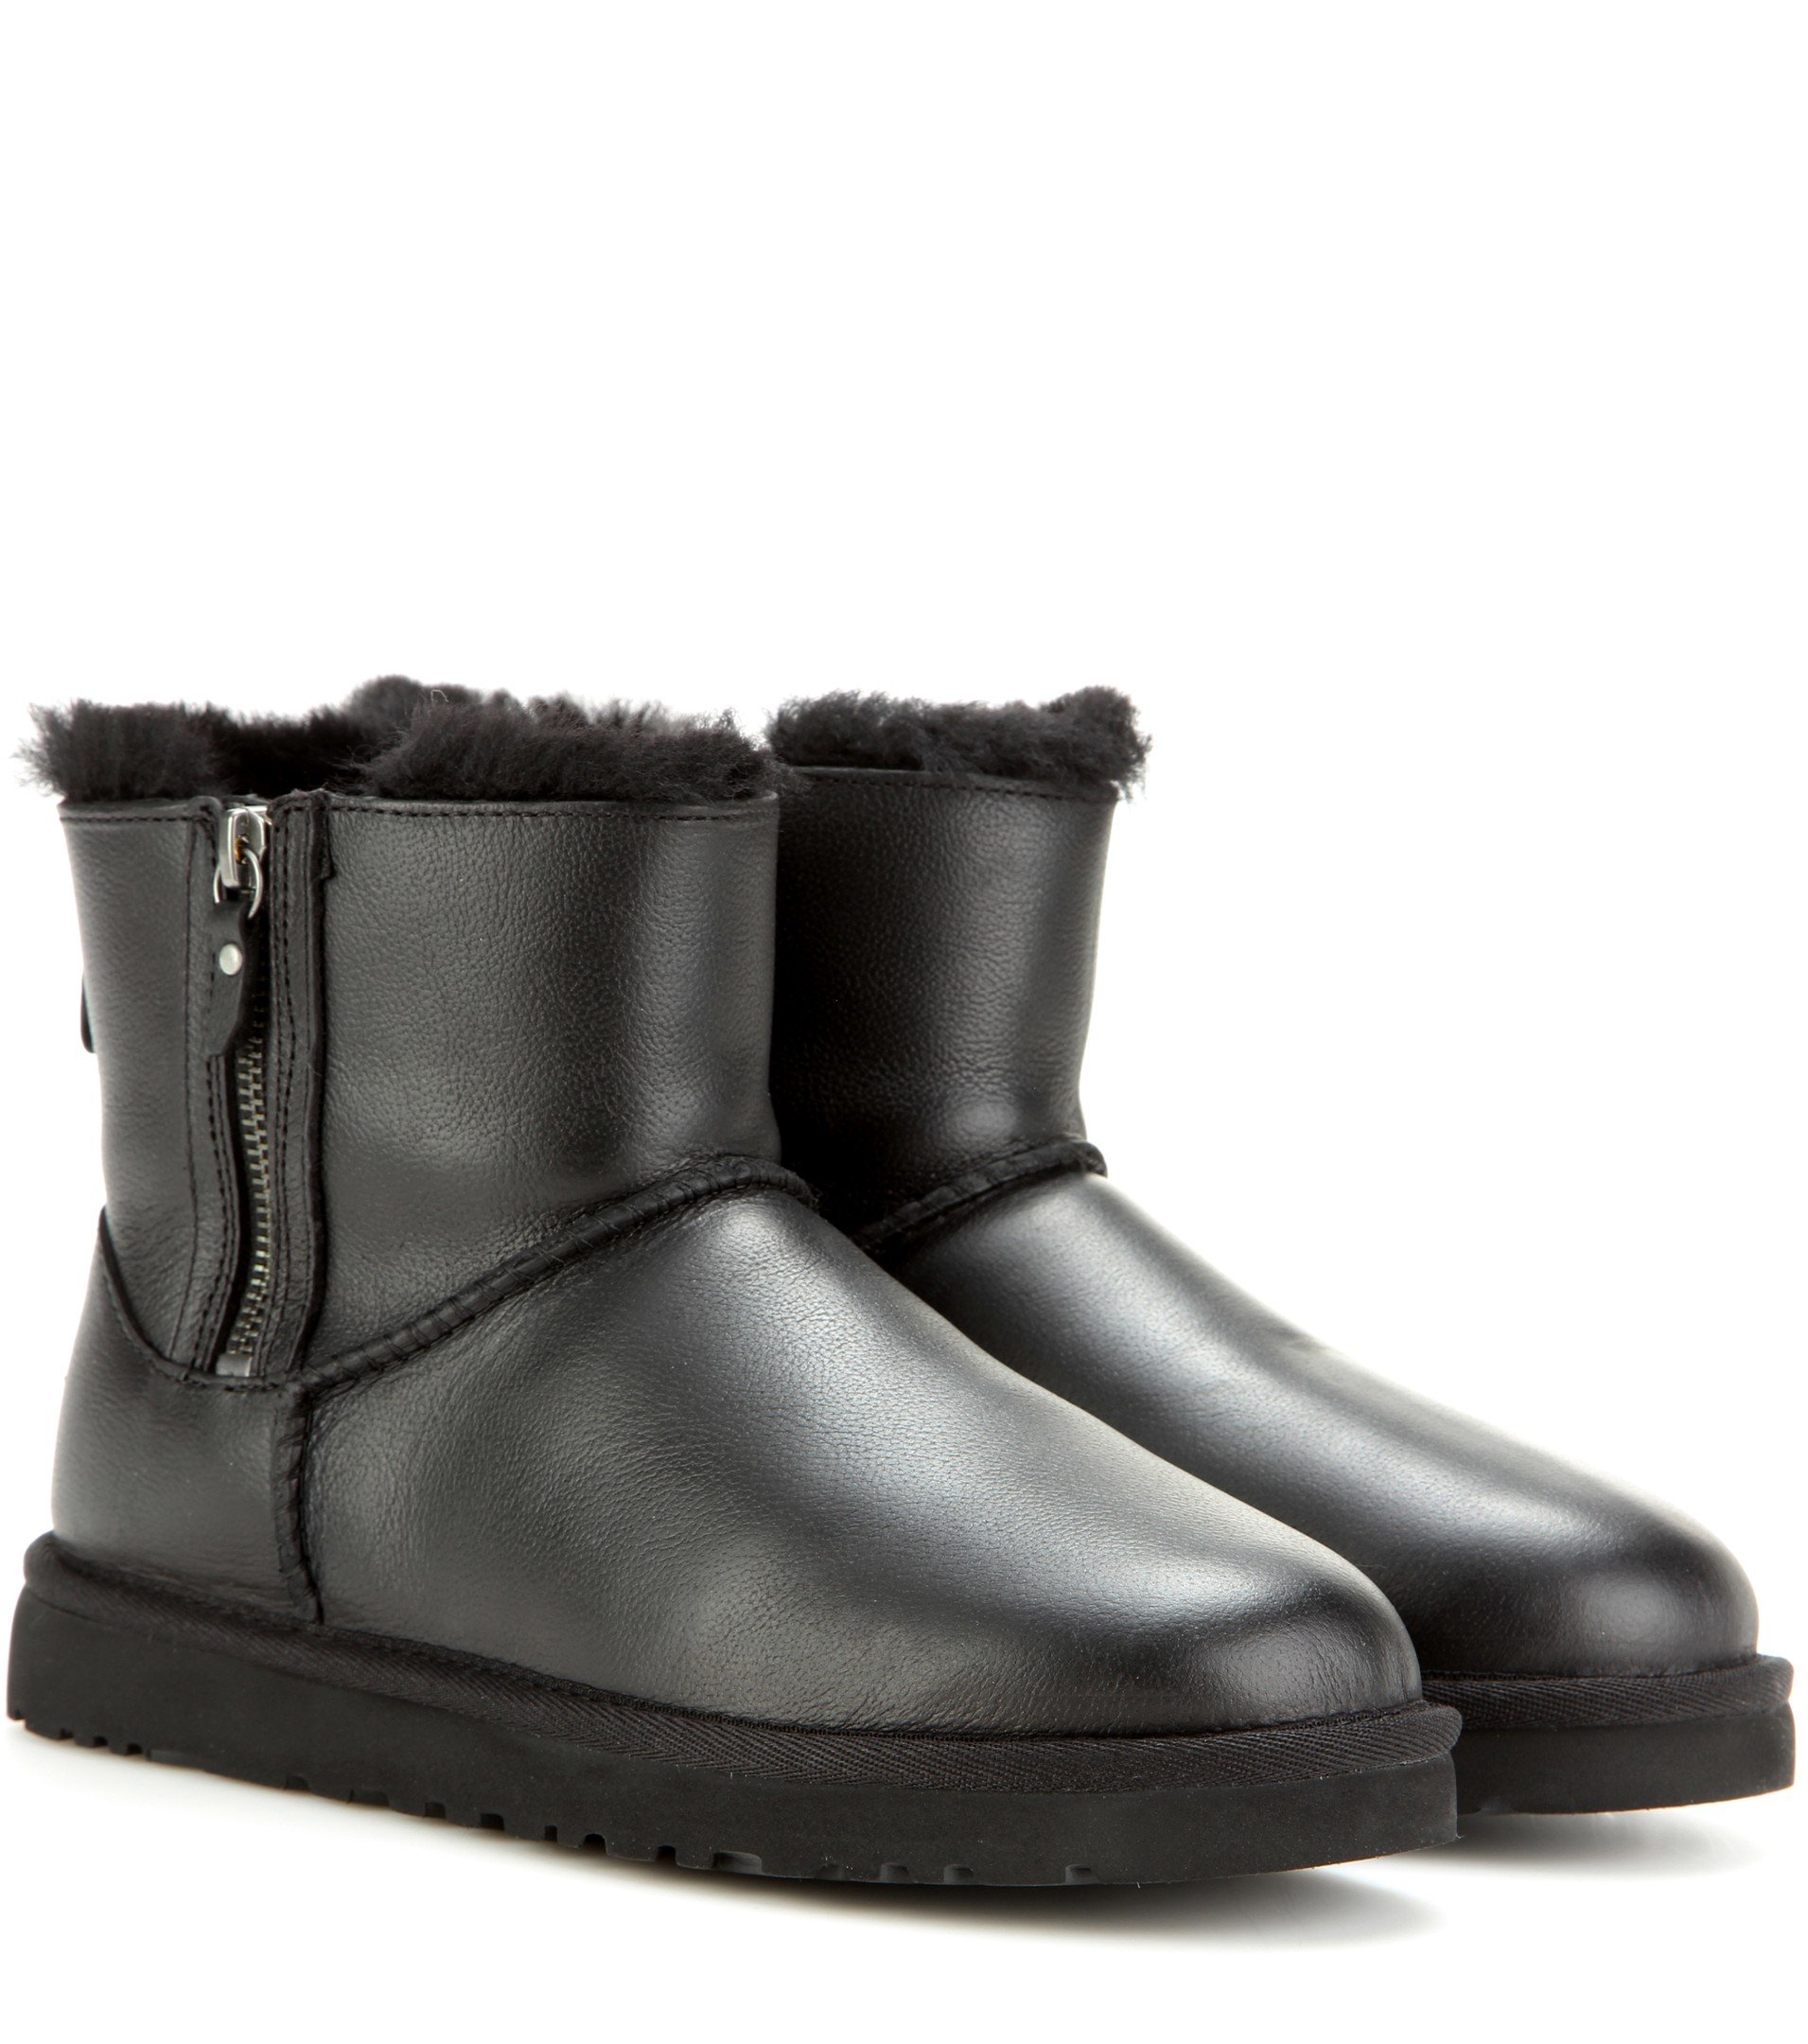 Lyst - Ugg Classic Mini Double Zip Leather Ankle Boots in Black